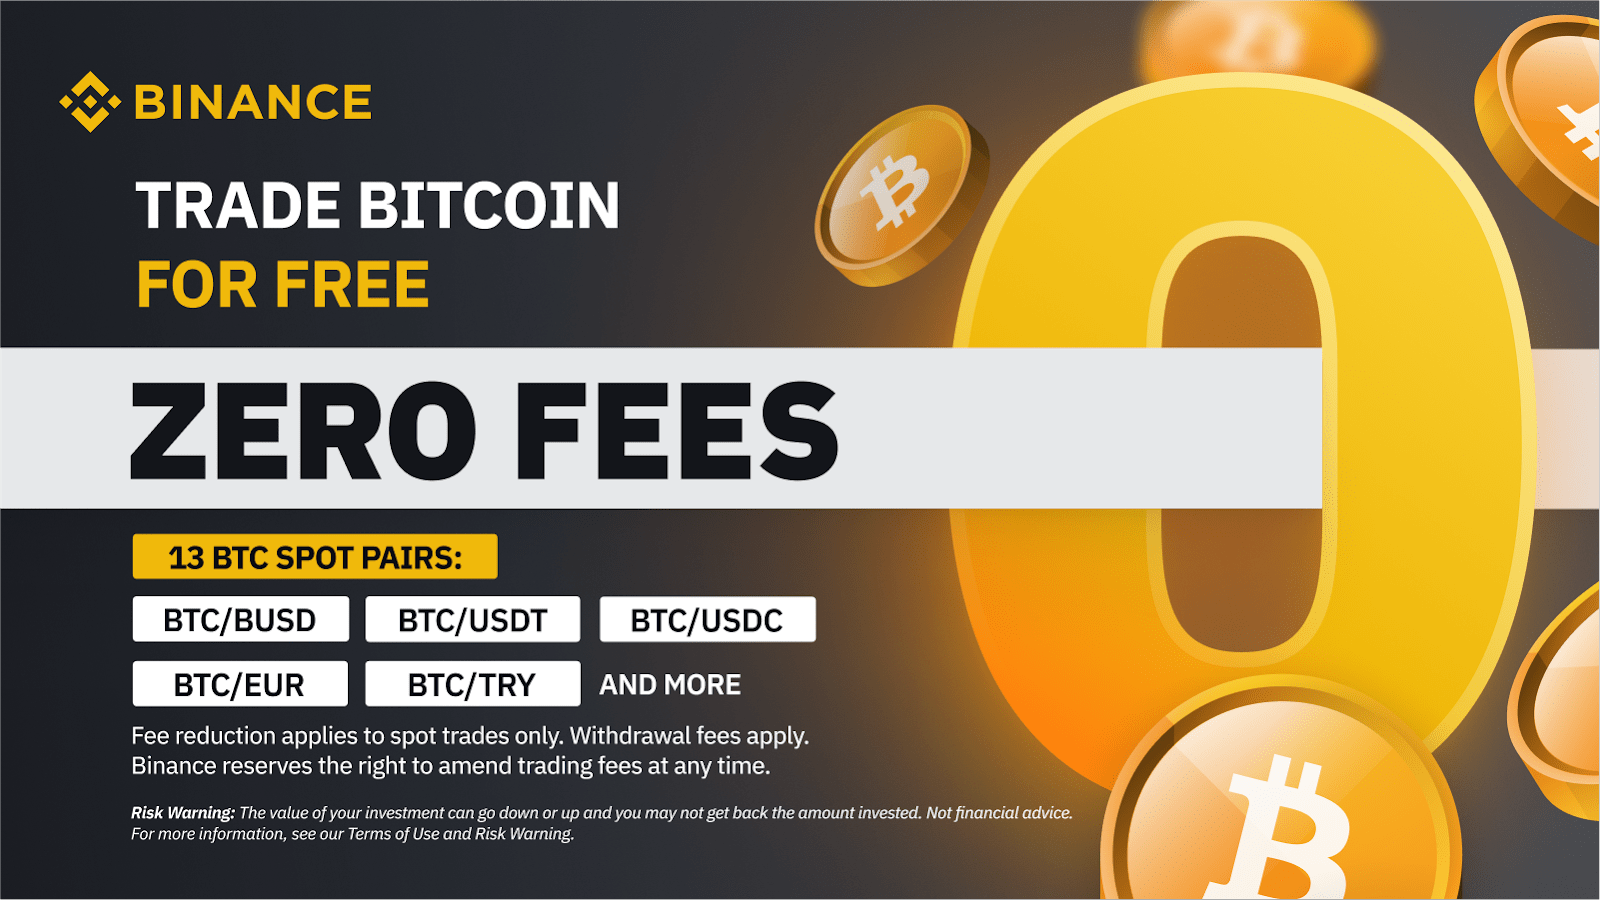 How To Buy Bitcoin With the Lowest Fees in | Beginner’s Guide